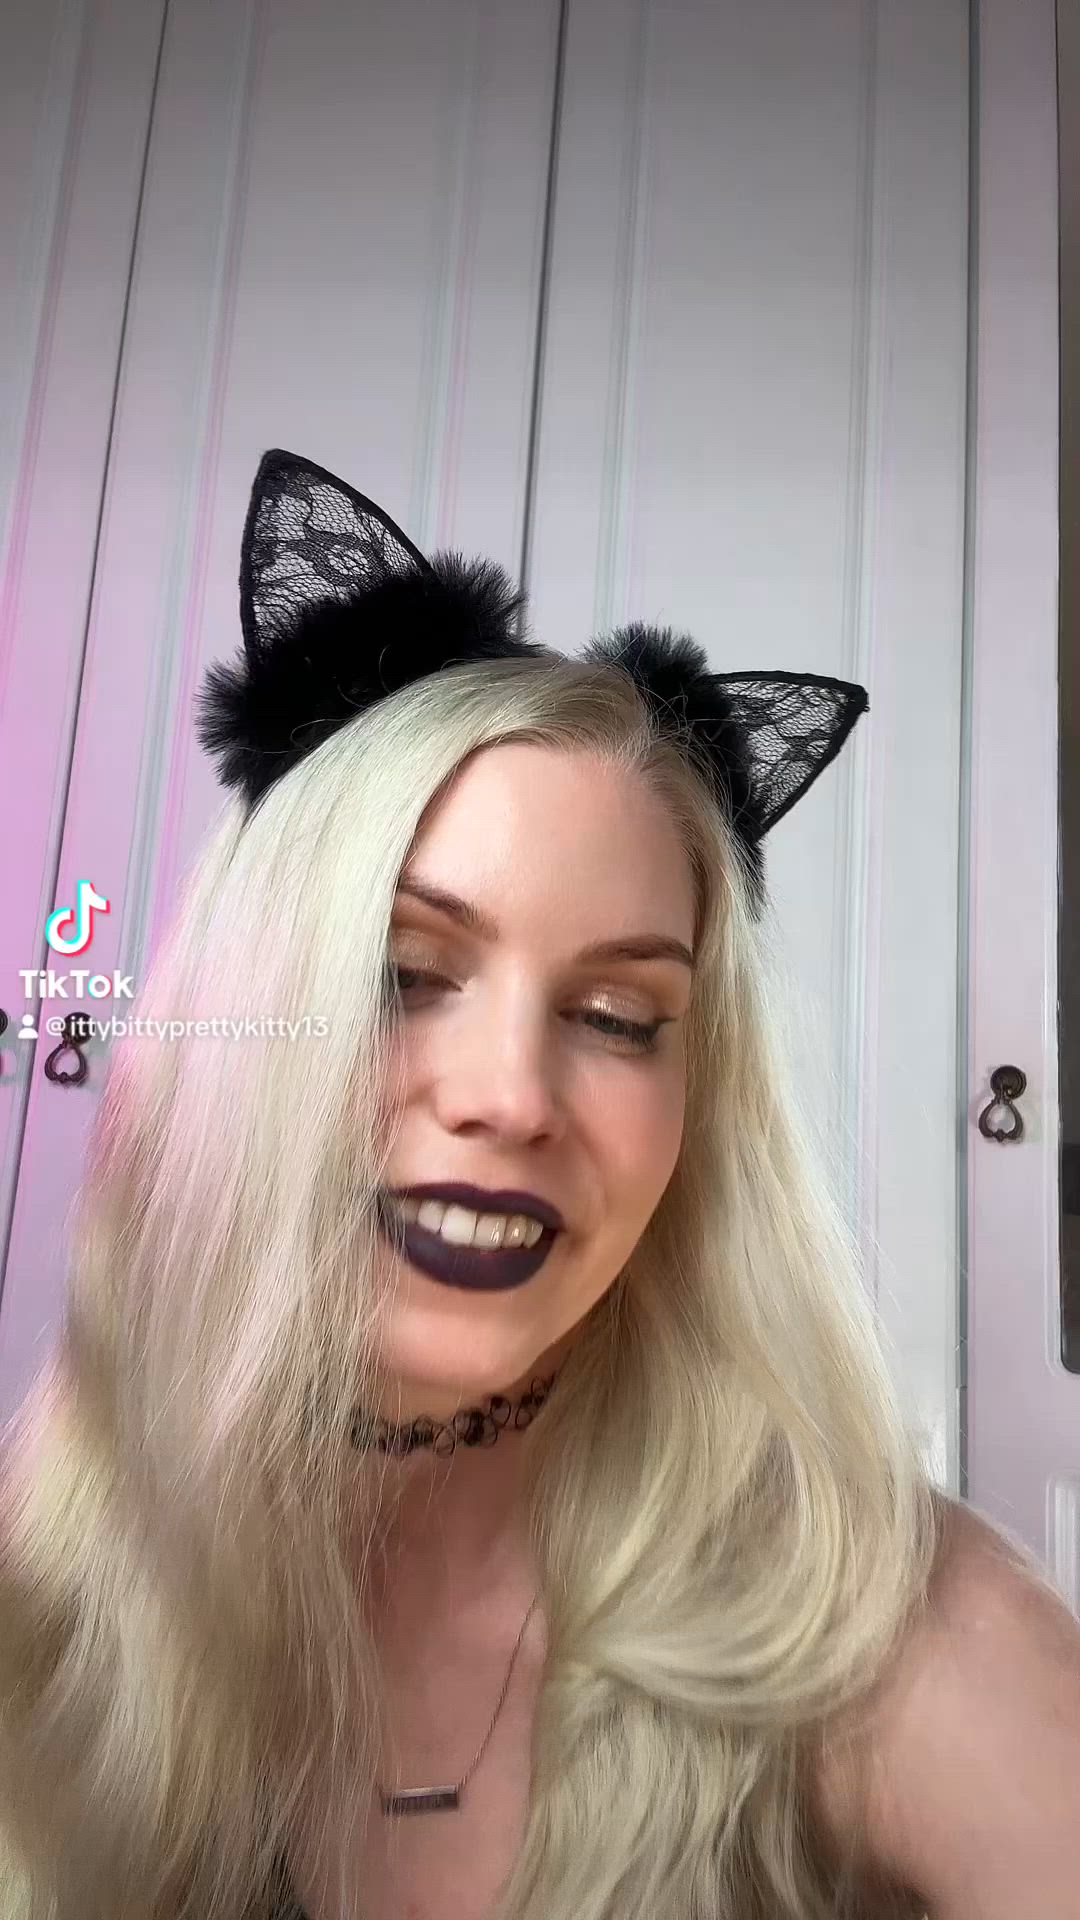 Amateur porn video with onlyfans model Kitty <strong>@ittybittyprettykitty</strong>